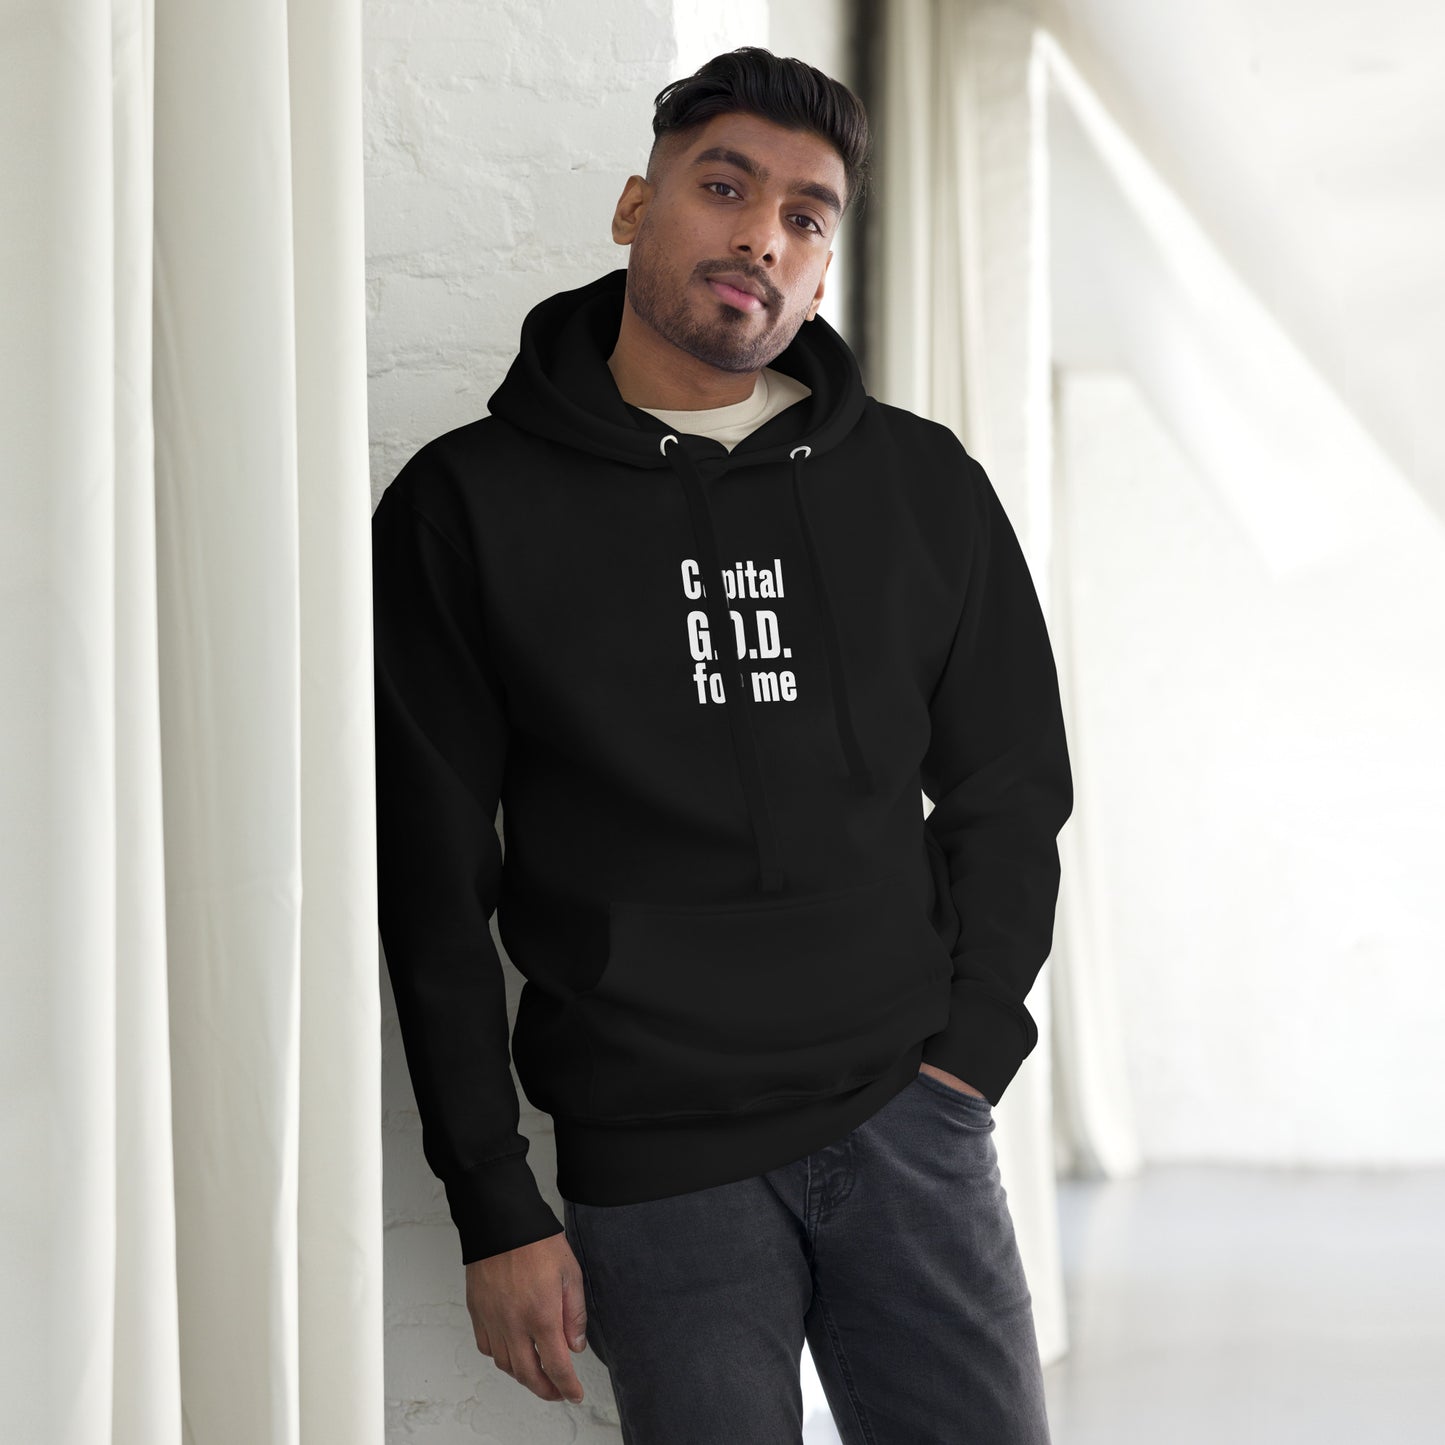 Capital G.O.D. for me Unisex Hoodie